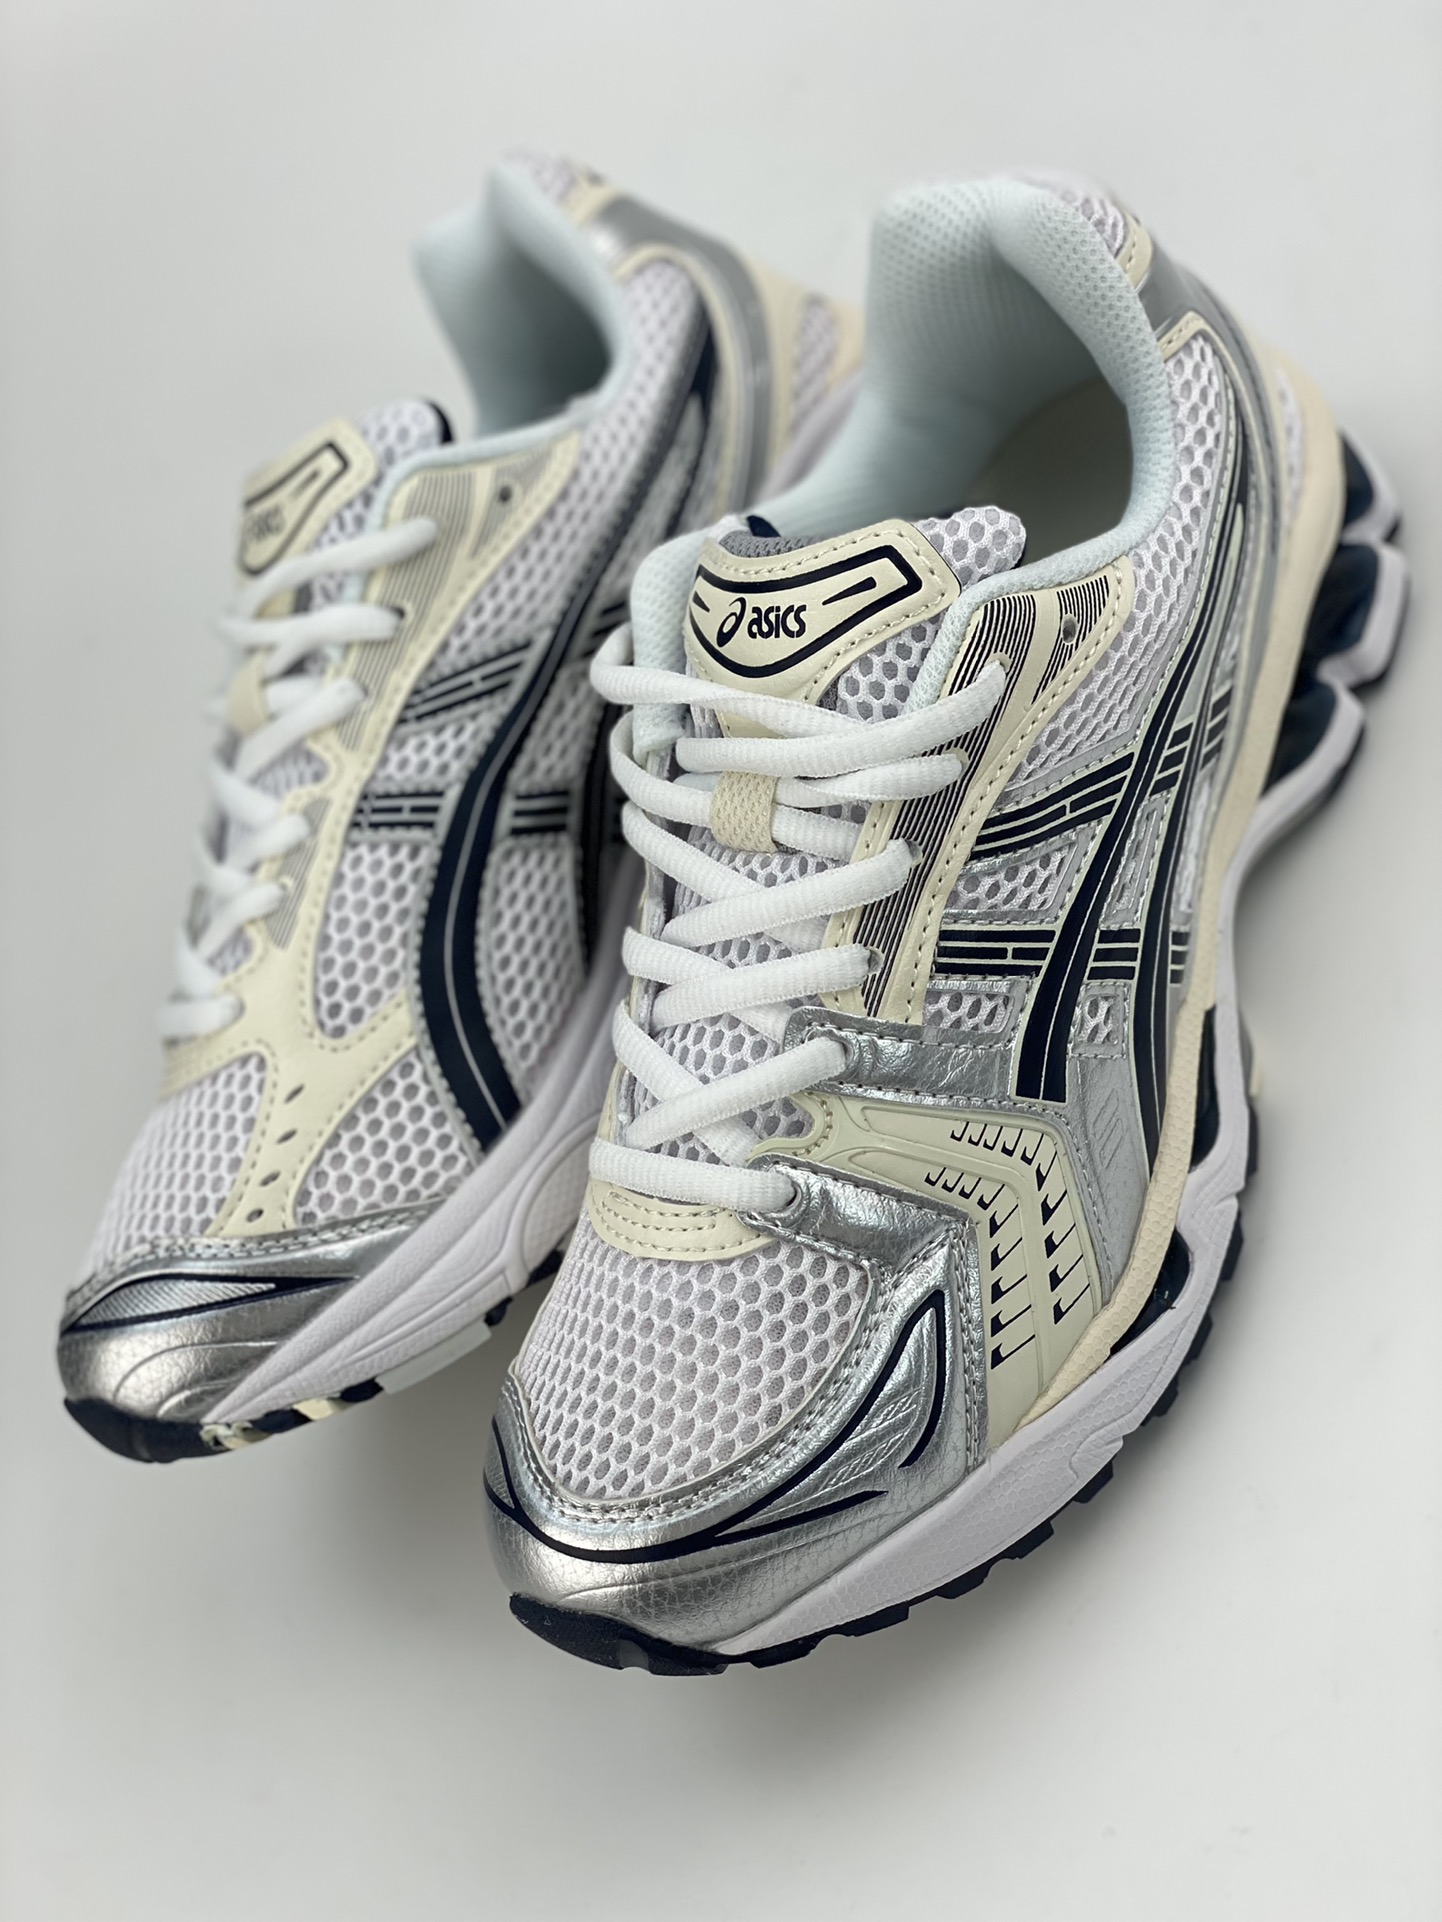 Asics Gel-Kayano 14 version sports casual breathable professional running shoes 1201A056-109